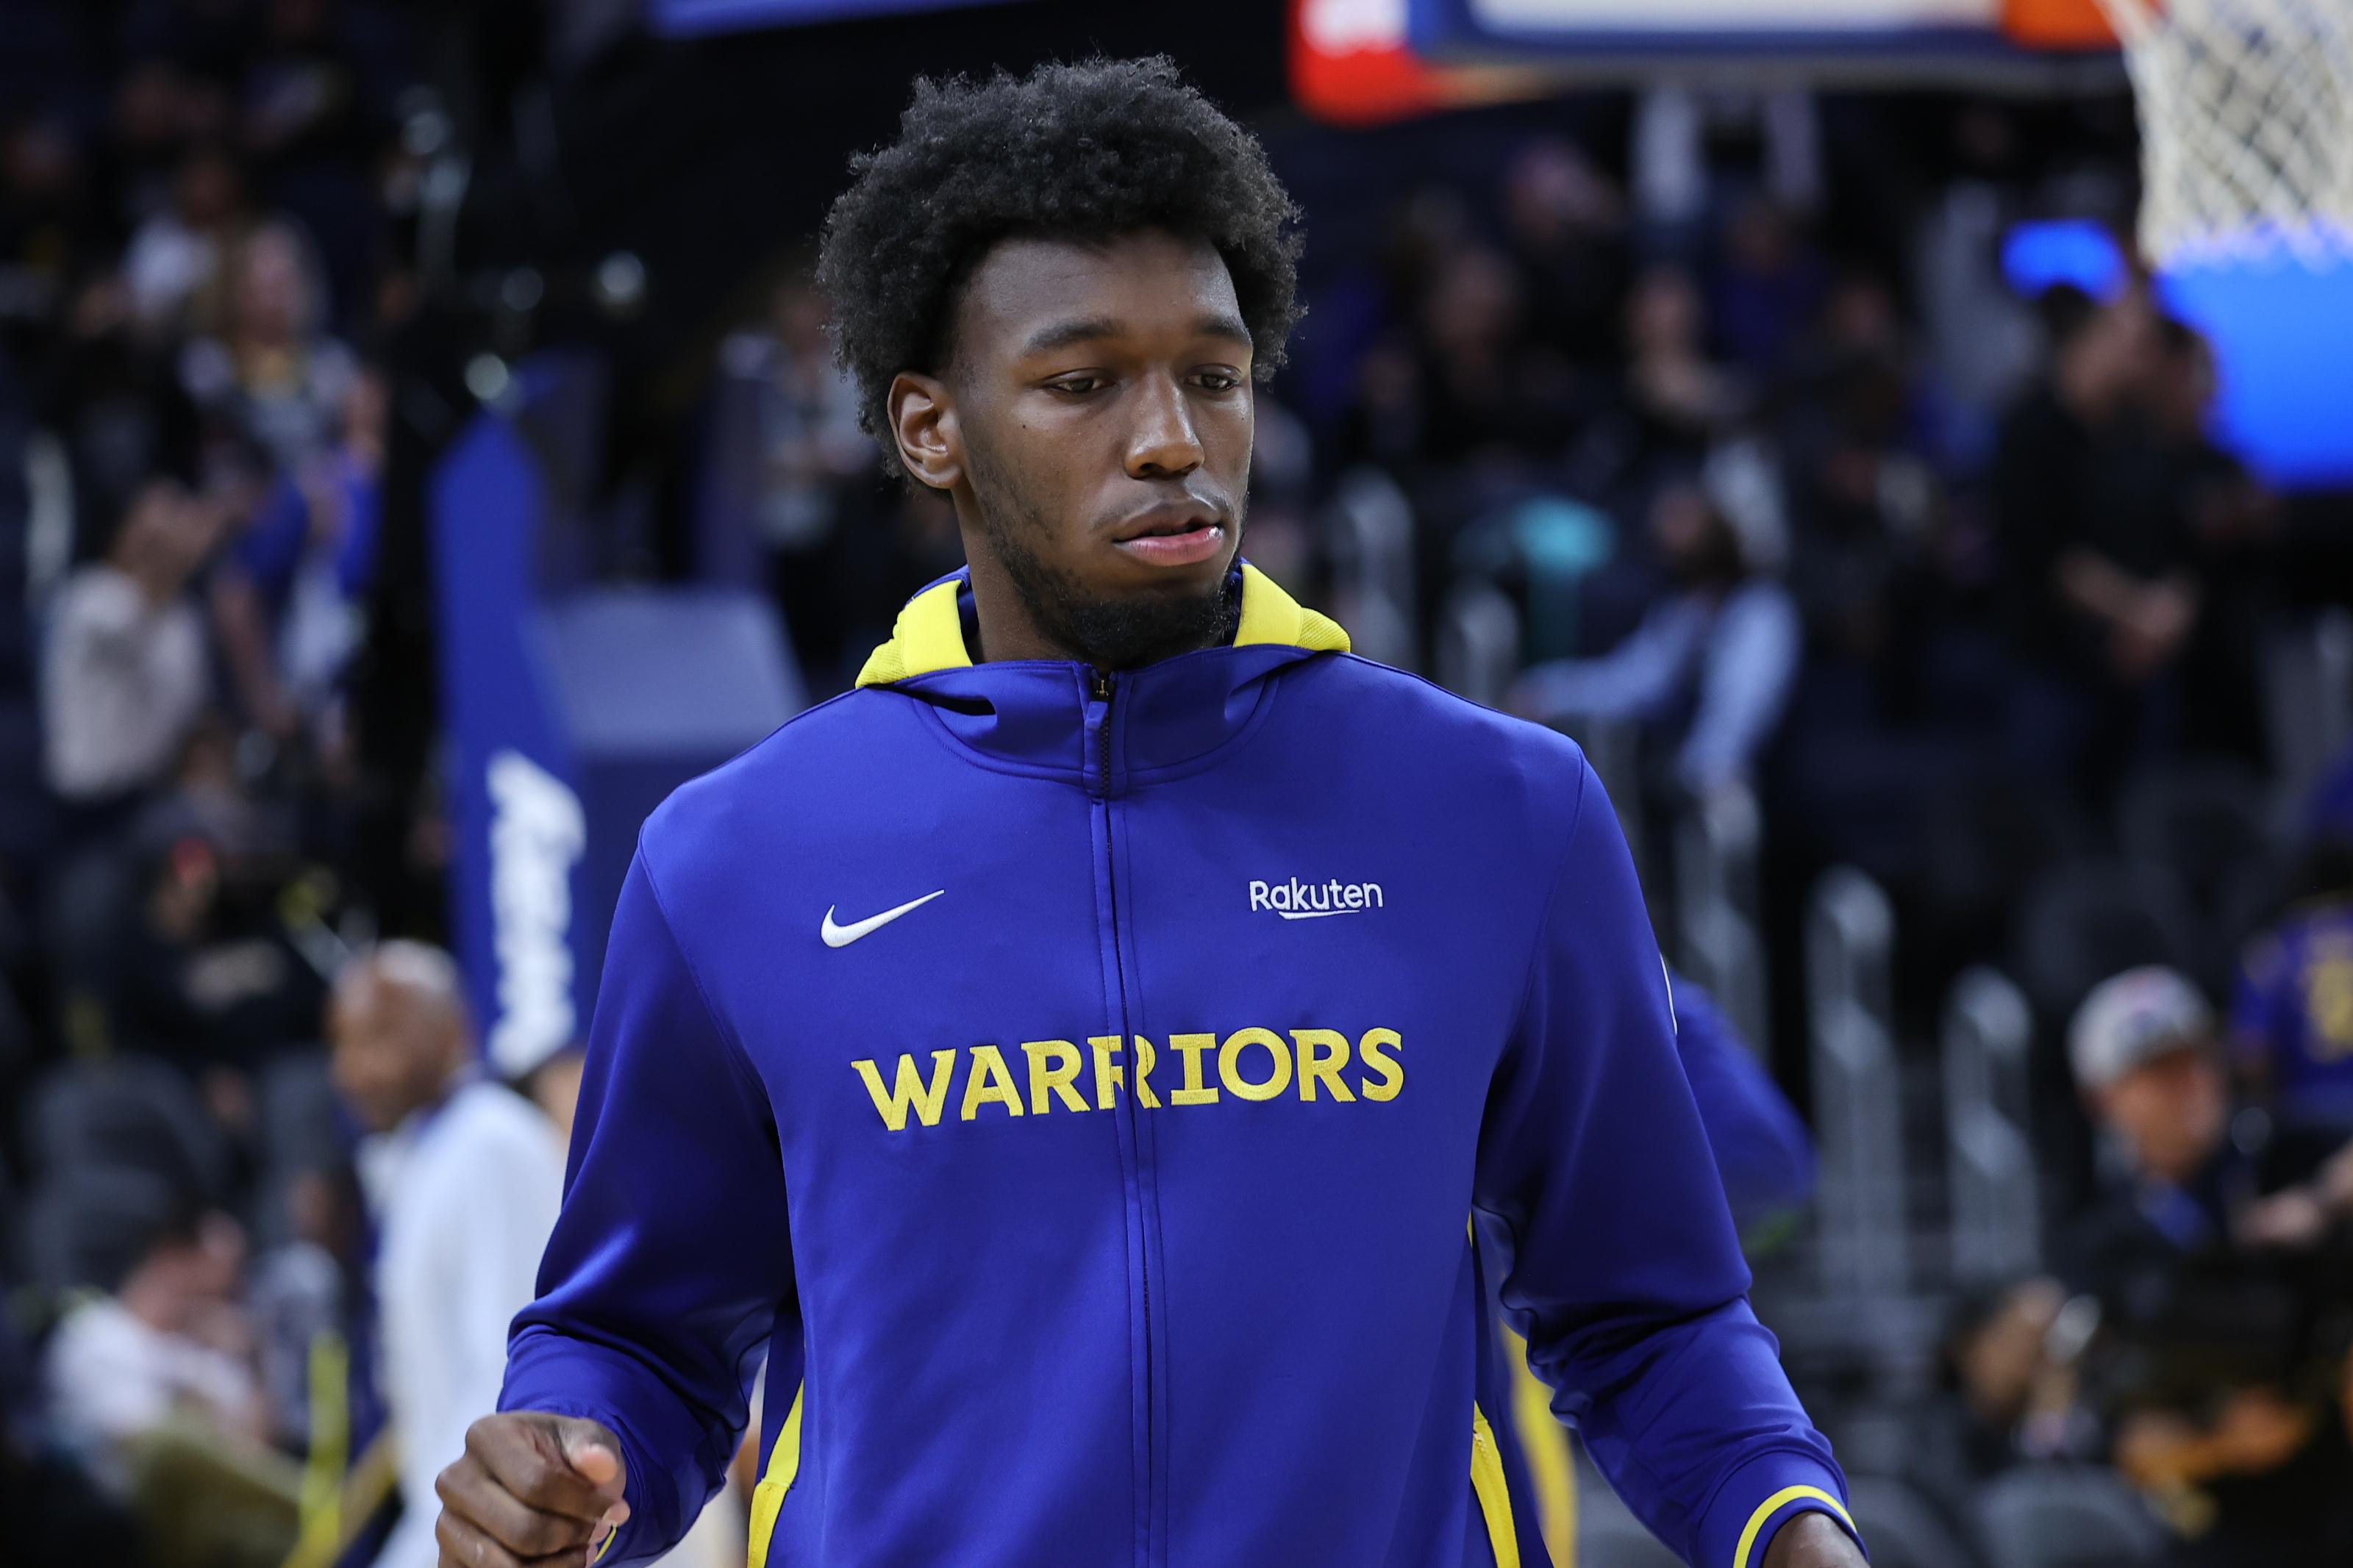 James Wiseman, LaMelo Ball and a historic mistake by Golden State